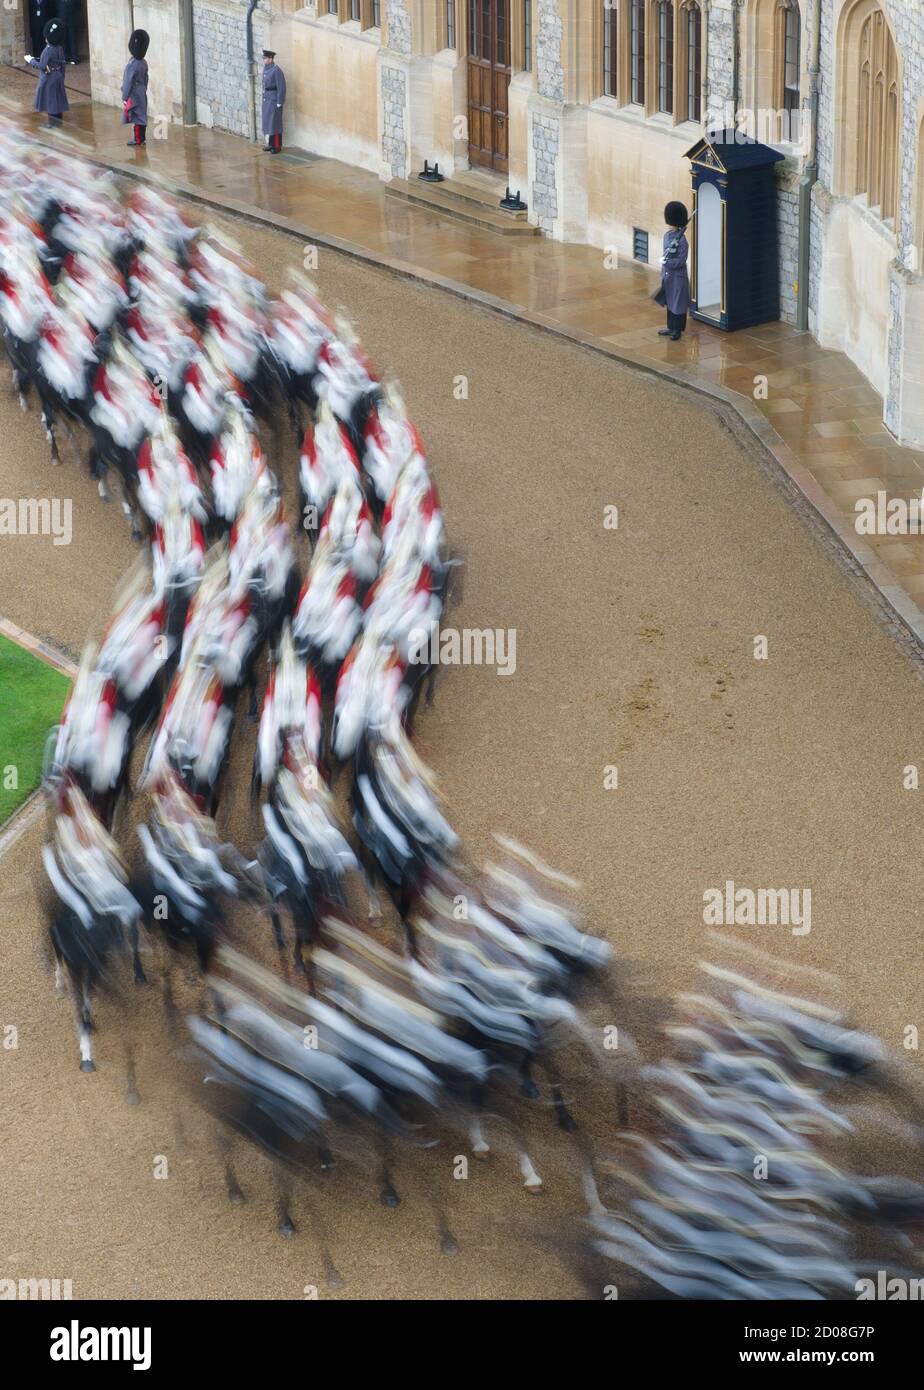 Soldiers march out of the central courtyard after being presented to the Amir of Kuwait, Sheikh Sabah al-Ahmad al-Sabah, in Windsor Castle, in Windsor, southern England November 27, 2012.  The Amir arrived at Windsor Castle at the start of a state visit to Britain.   REUTERS/Leon Neal/Pool     (BRITAIN - Tags: ENTERTAINMENT POLITICS SOCIETY ROYALS) Stock Photo